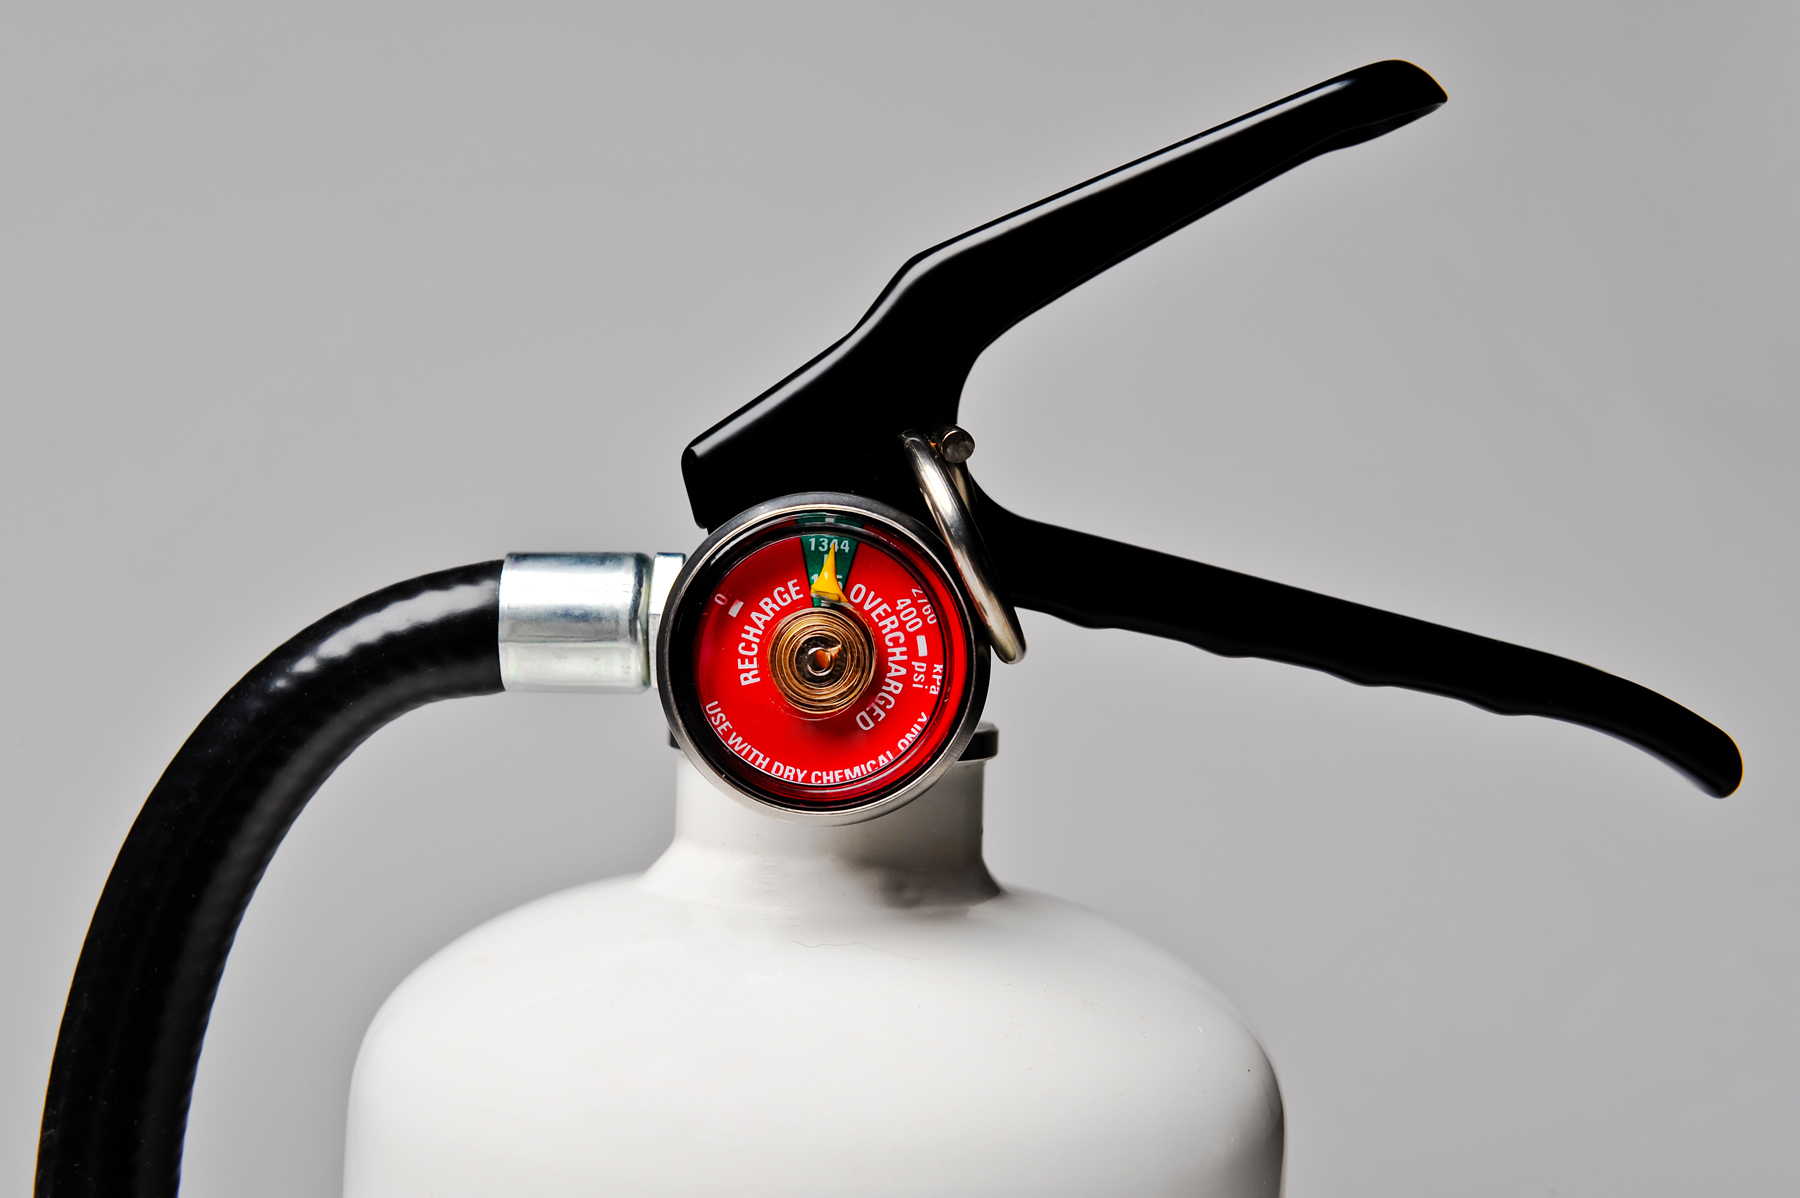 Fire Extinguisher Service, Maintenance, Recharge and Inspections in Claremont, California